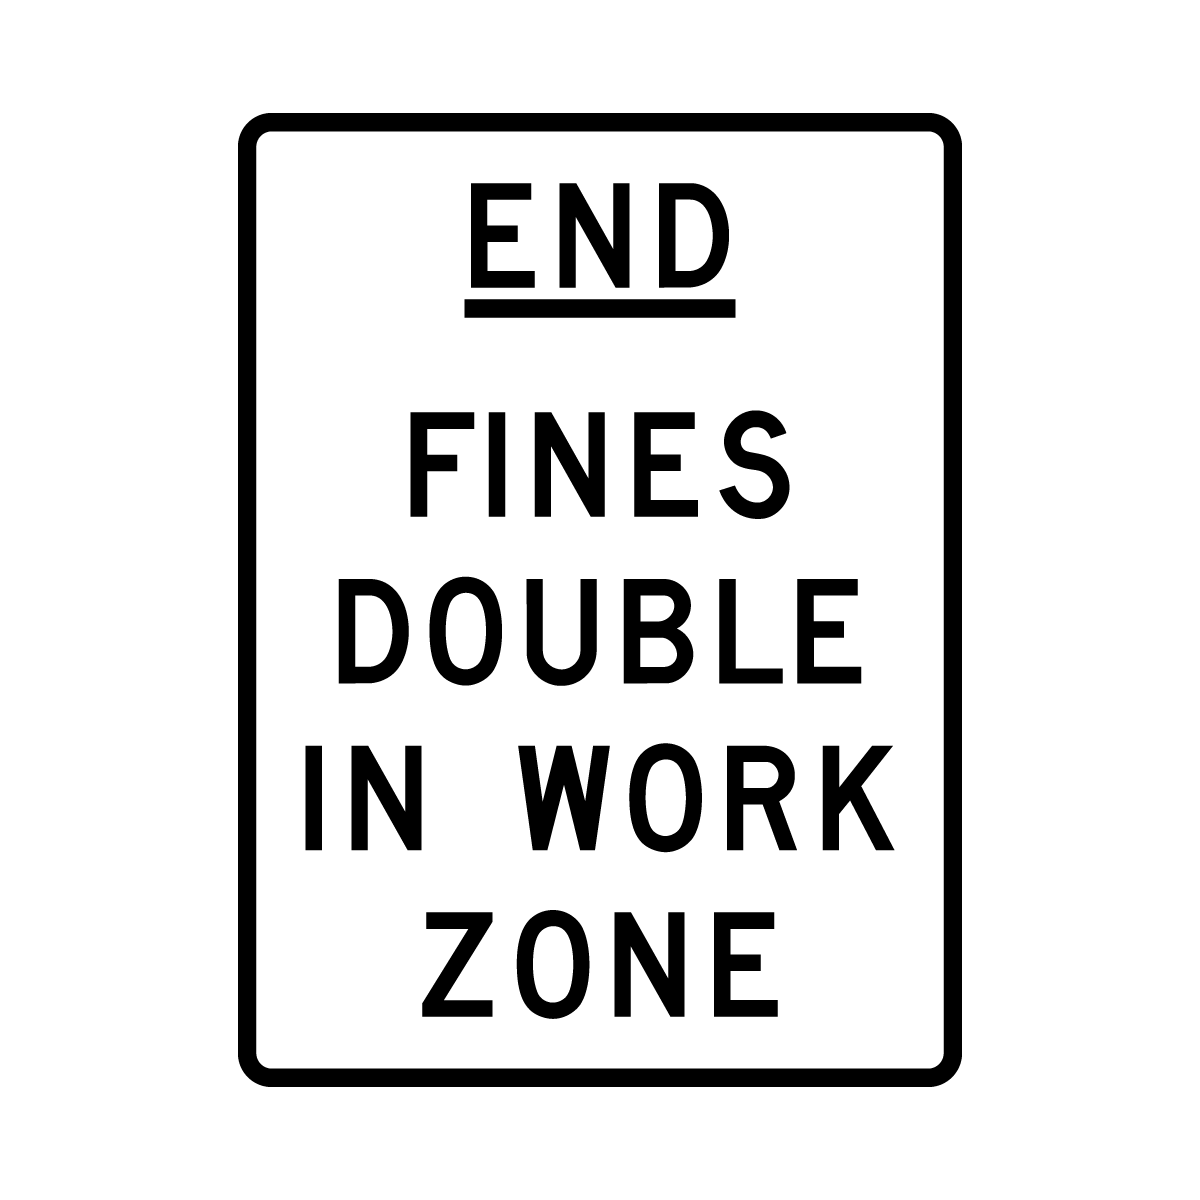 R52-6b End Fines Double in Work Zone